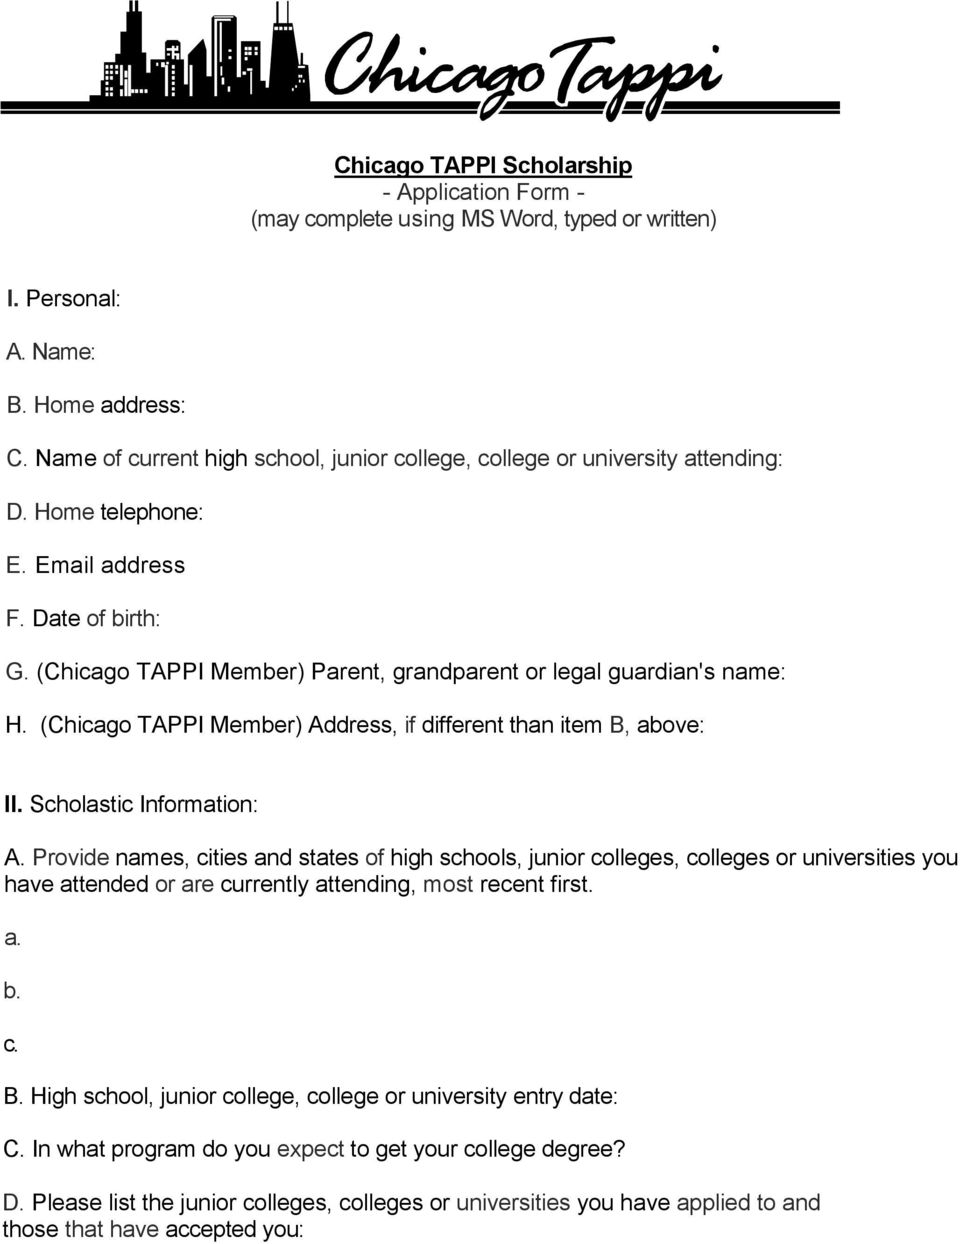 (Chicago TAPPI Member) Parent, grandparent or legal guardian's name: H. (Chicago TAPPI Member) Address, if different than item B, above: II. Scholastic Information: A.